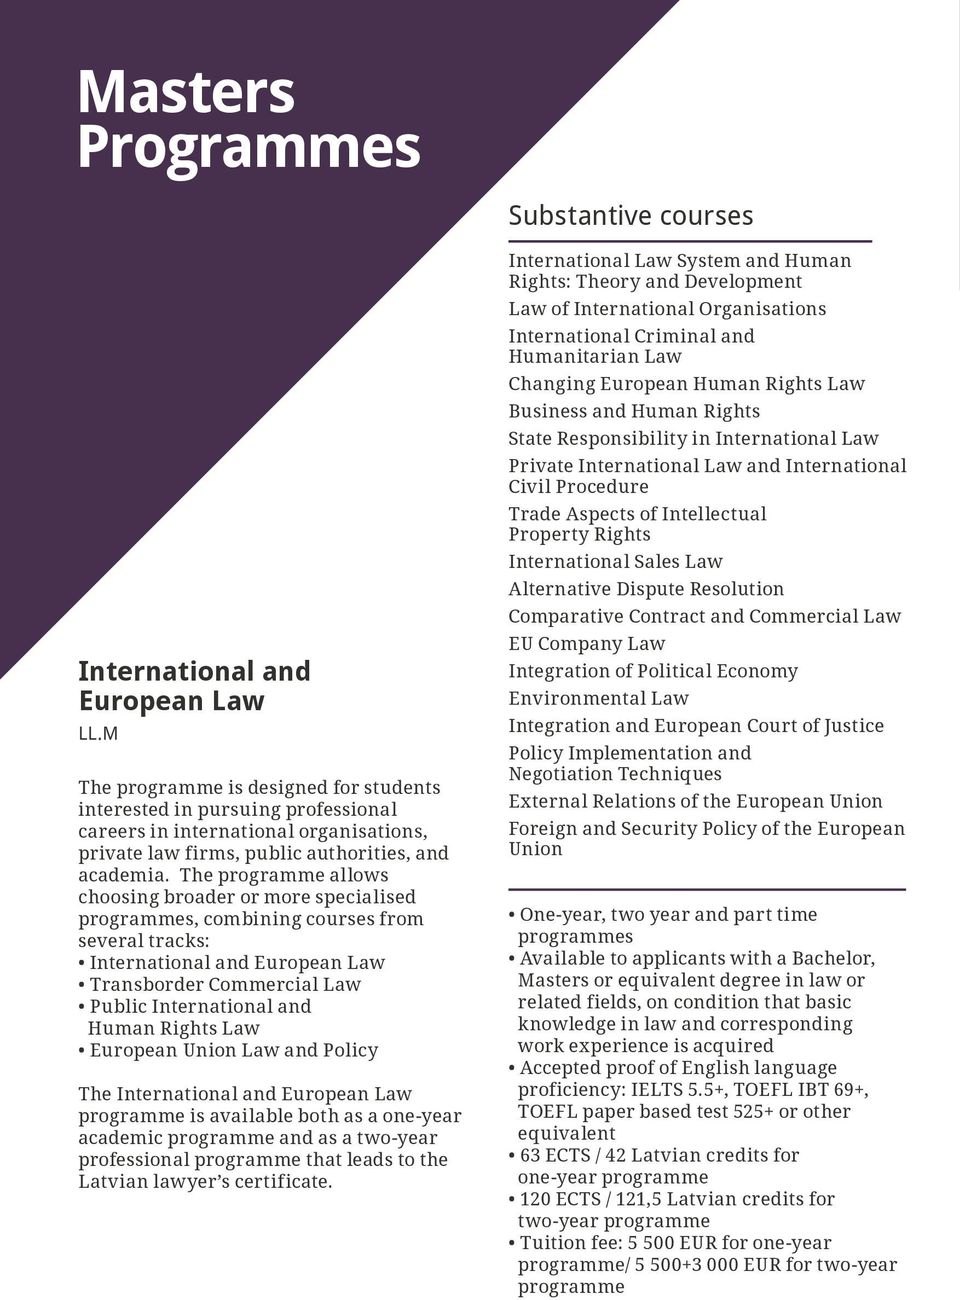 The programme allows choosing broader or more specialised programmes, combining courses from several tracks: International and European Law Transborder Commercial Law Public International and Human